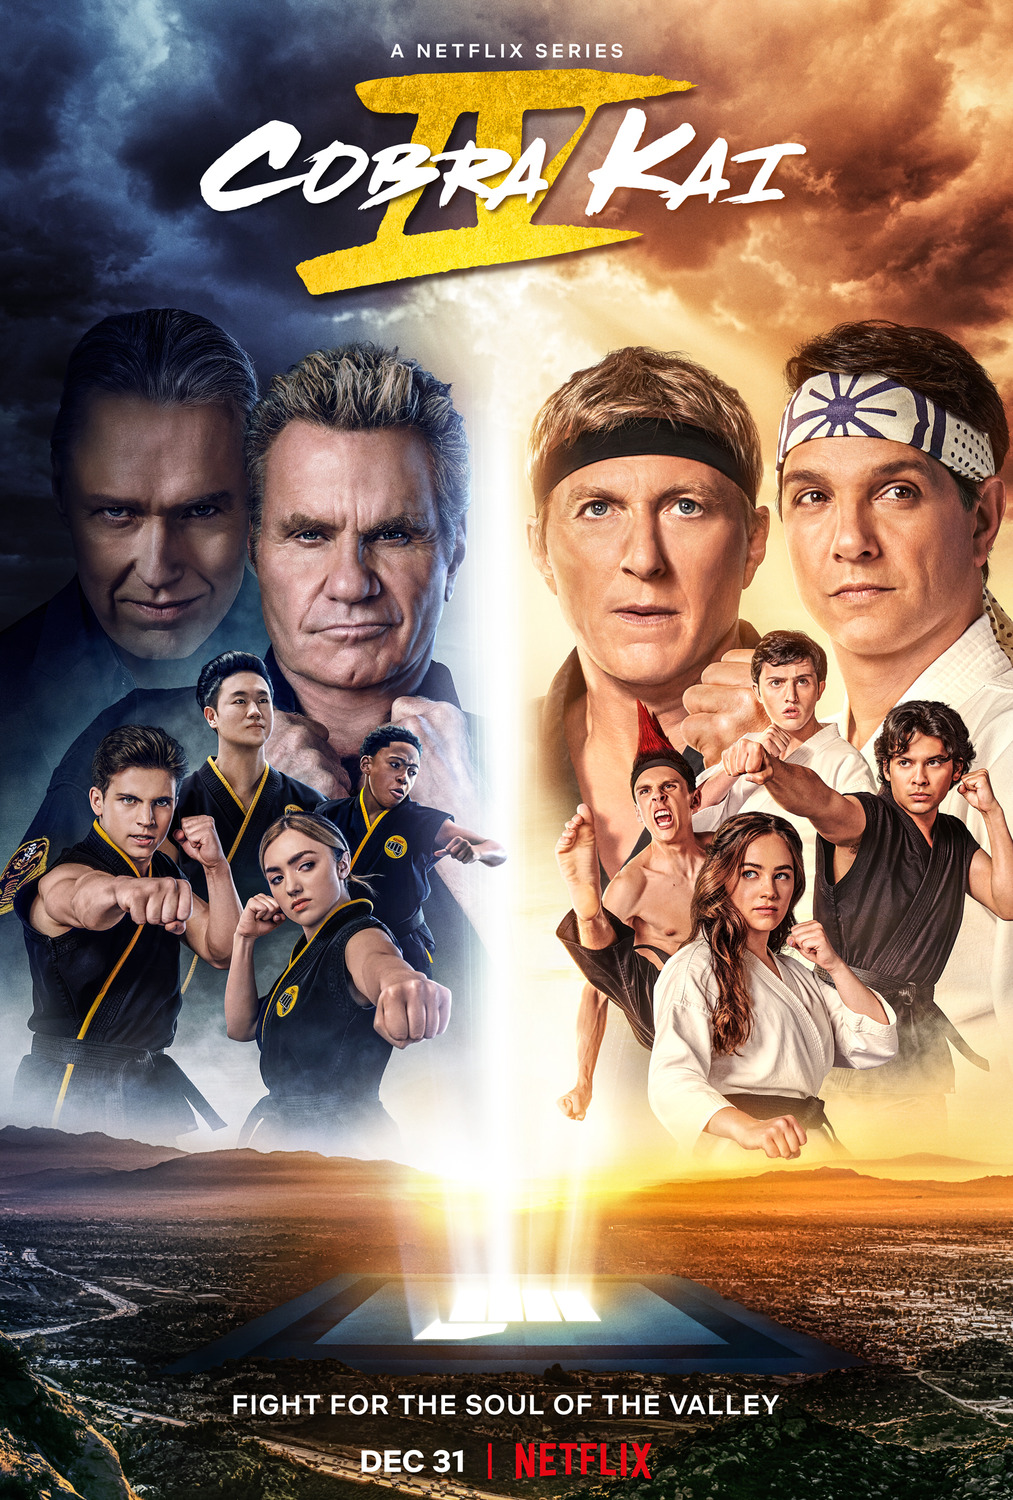 Extra Large TV Poster Image for Cobra Kai (#8 of 21)